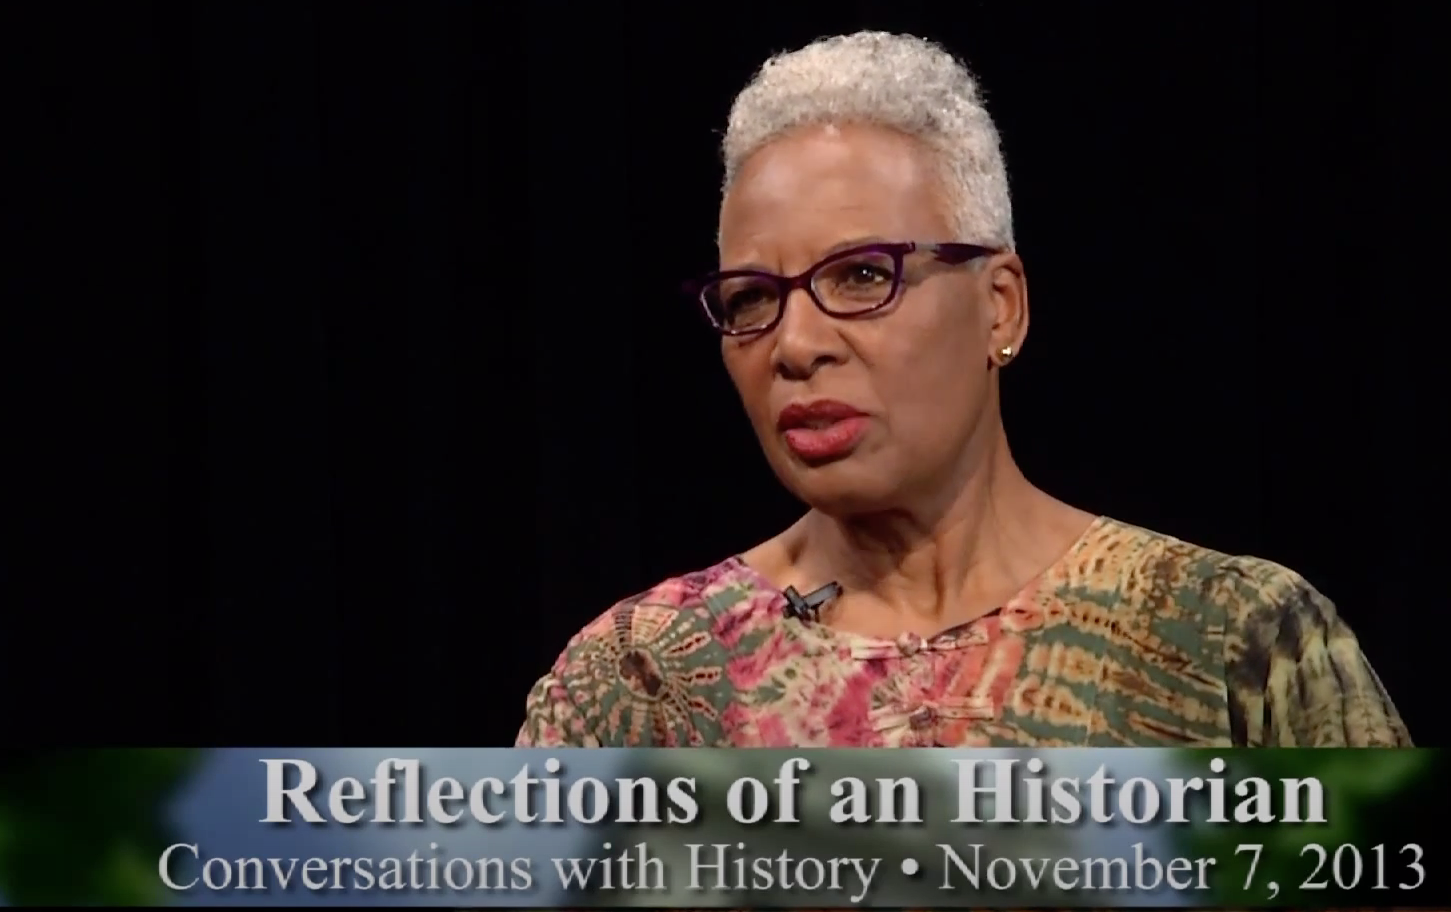 Nell Painter in “Reflections of an Historian” interview